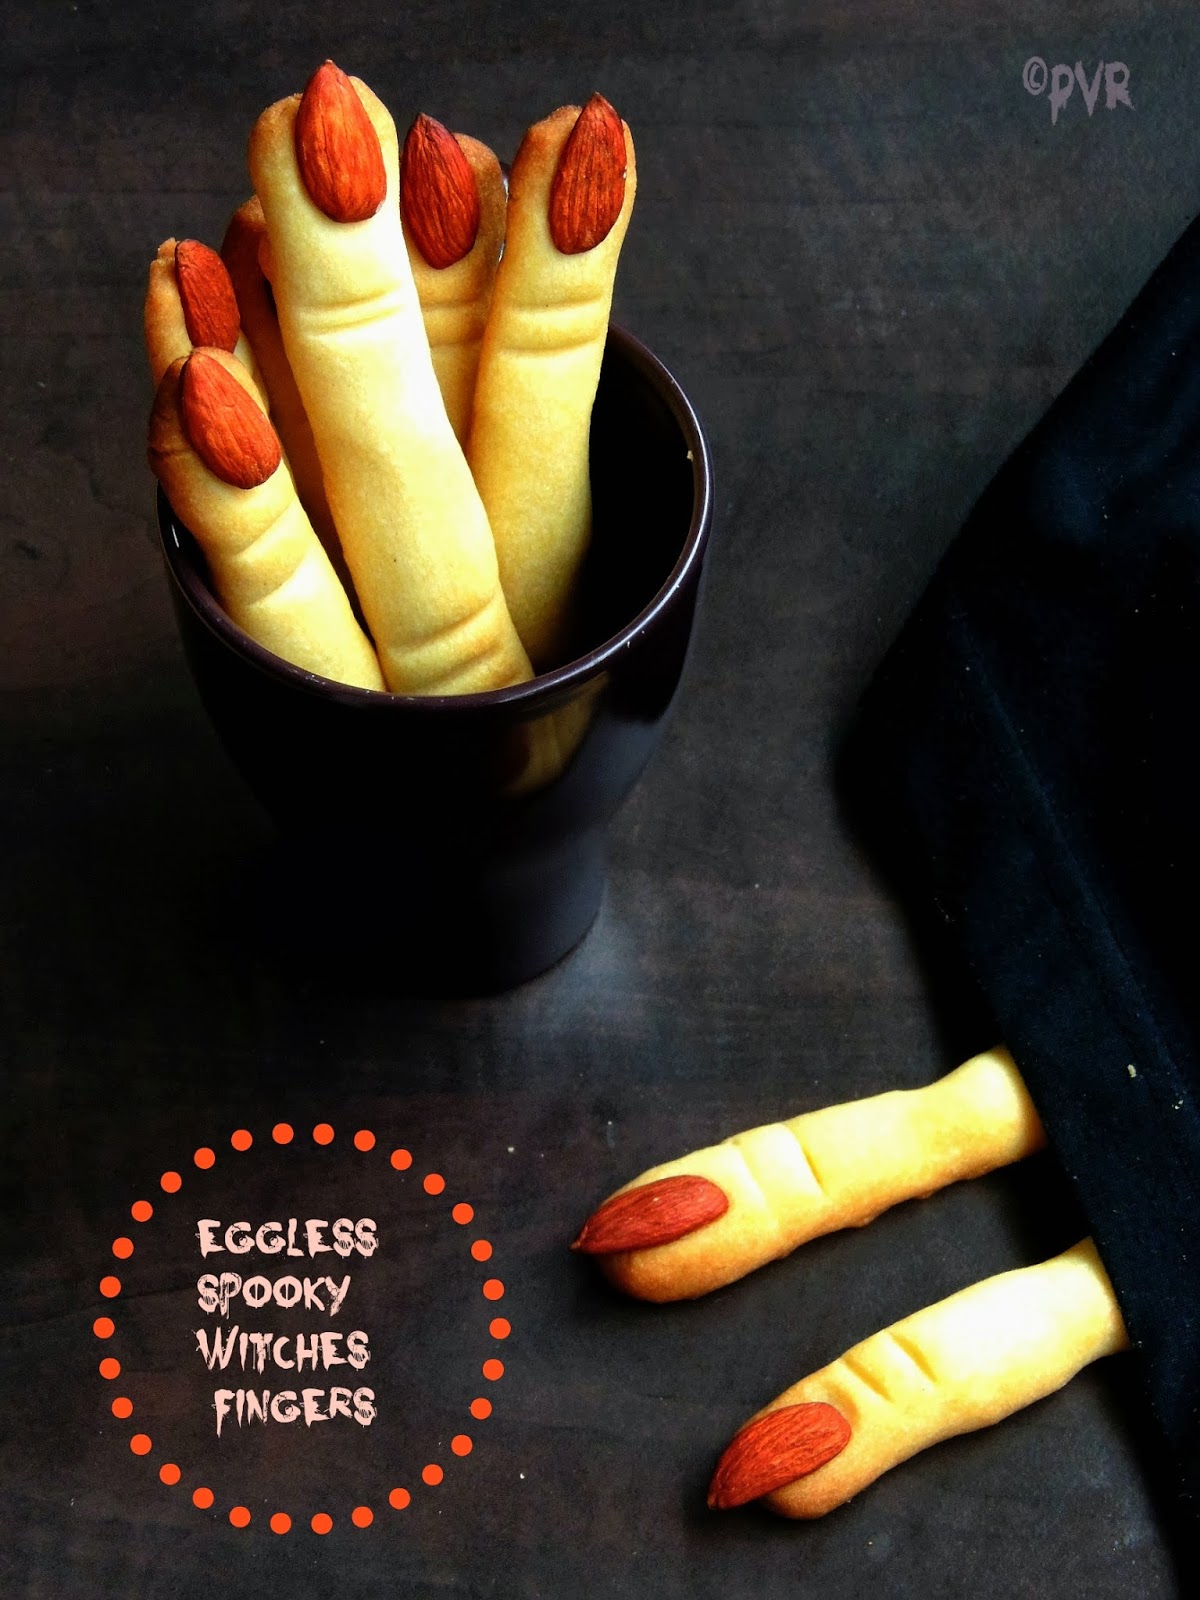 Priya's Versatile Recipes: Eggless Spooky Witch Fingers